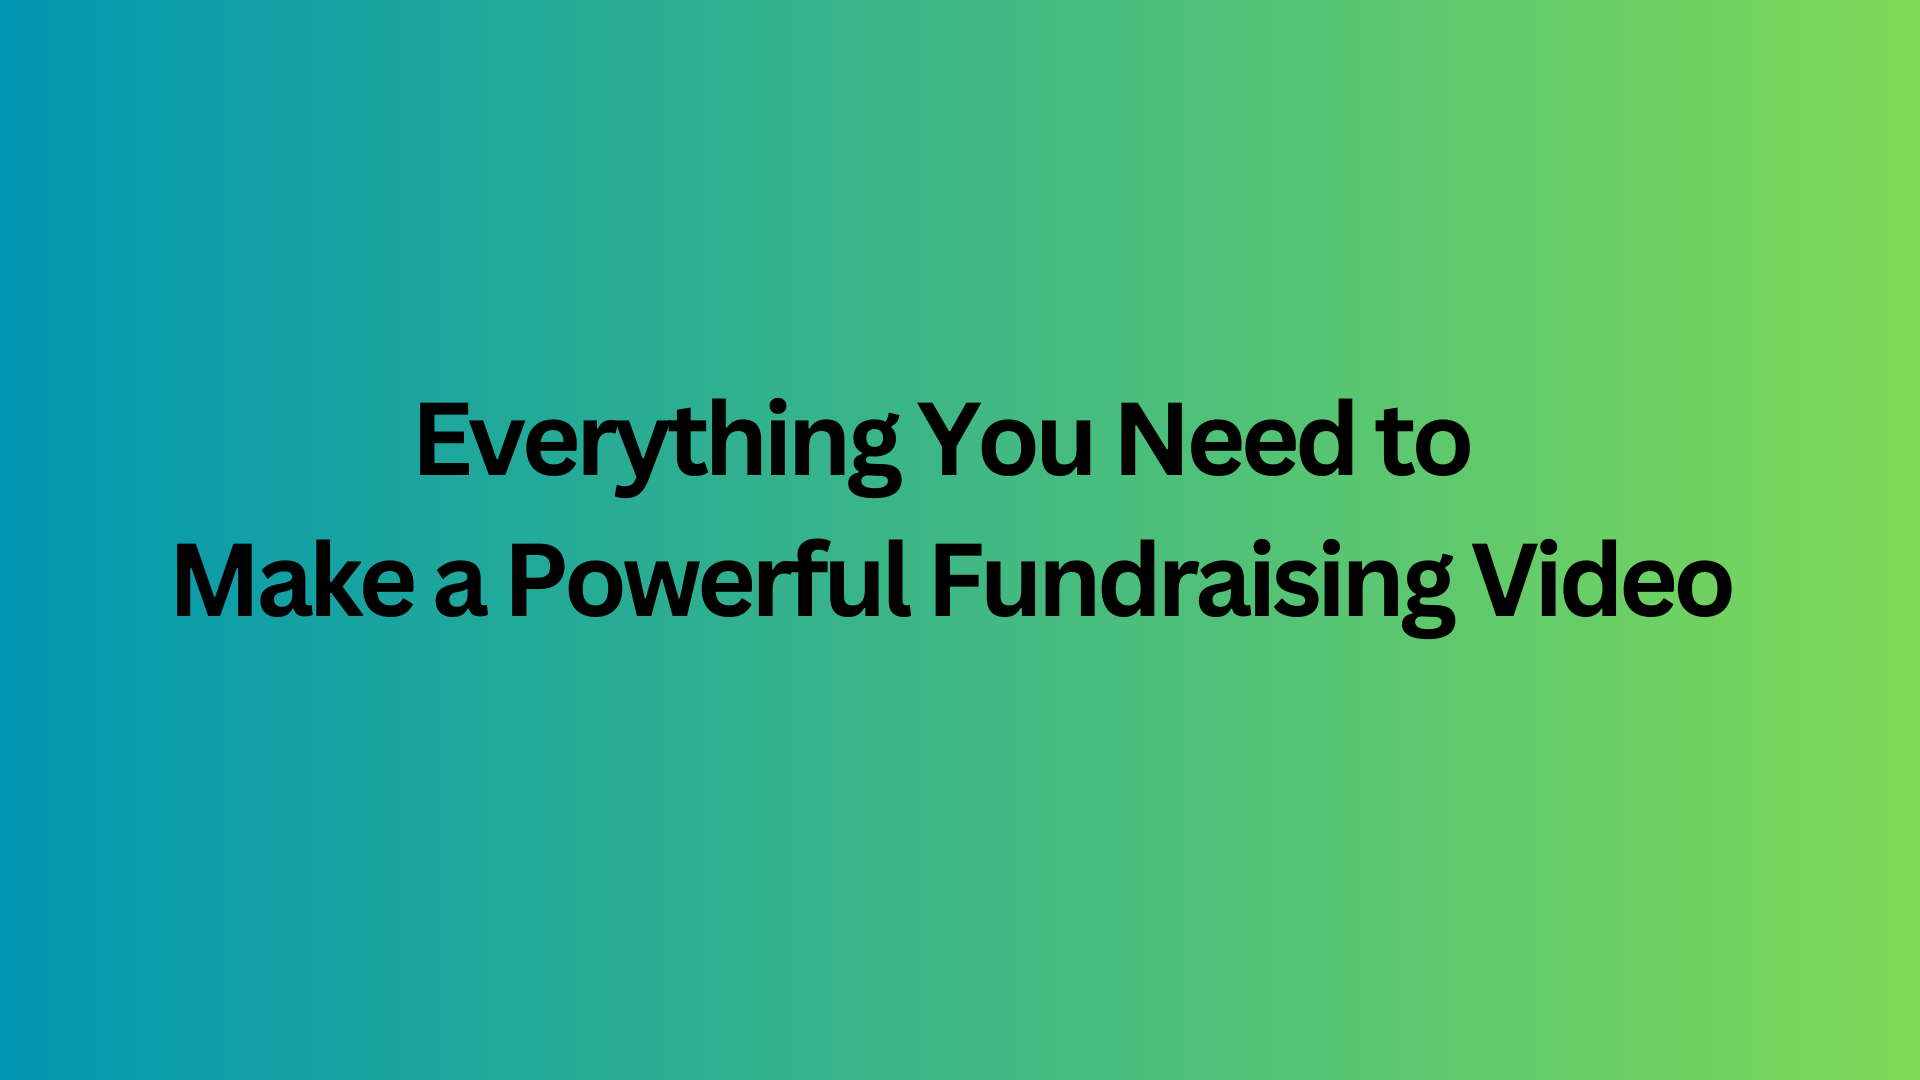 Everything You Need to Make a Powerful Fundraising Video